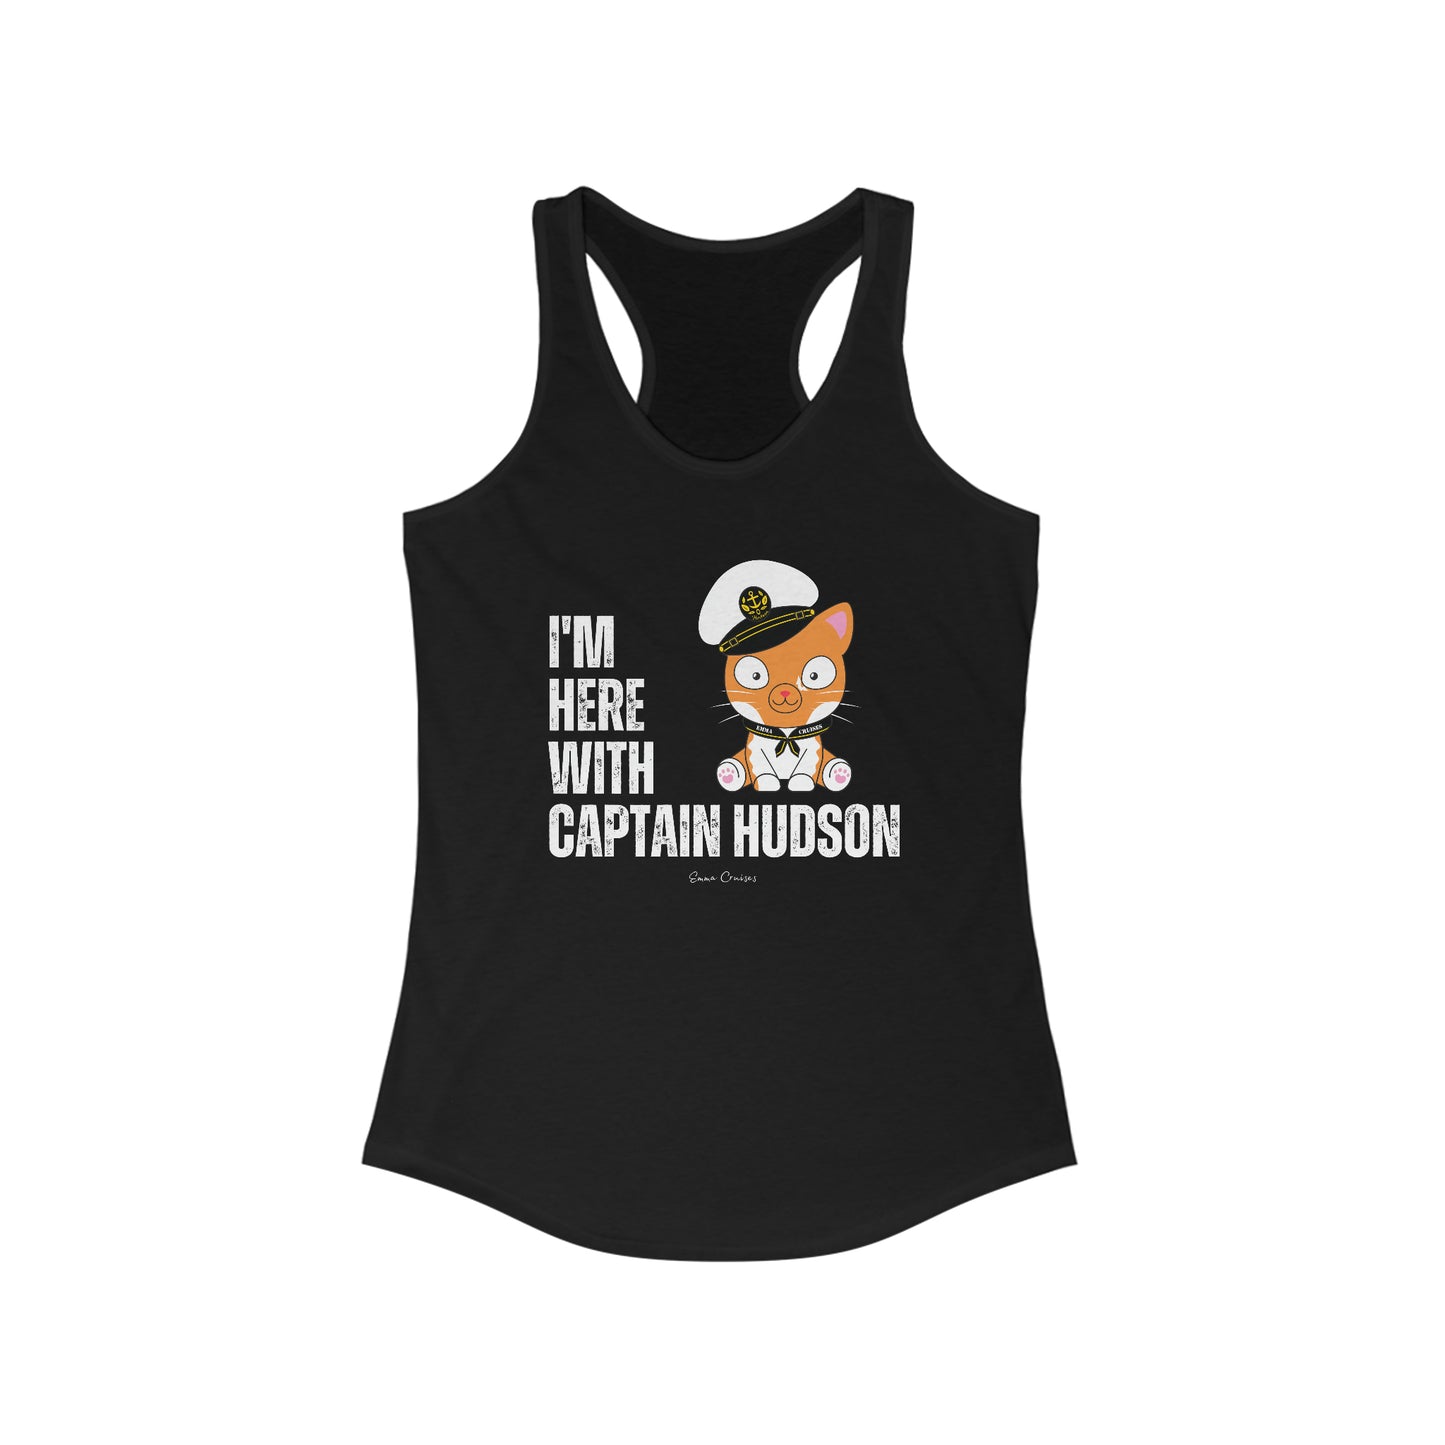 I'm With Captain Hudson - Tank Top